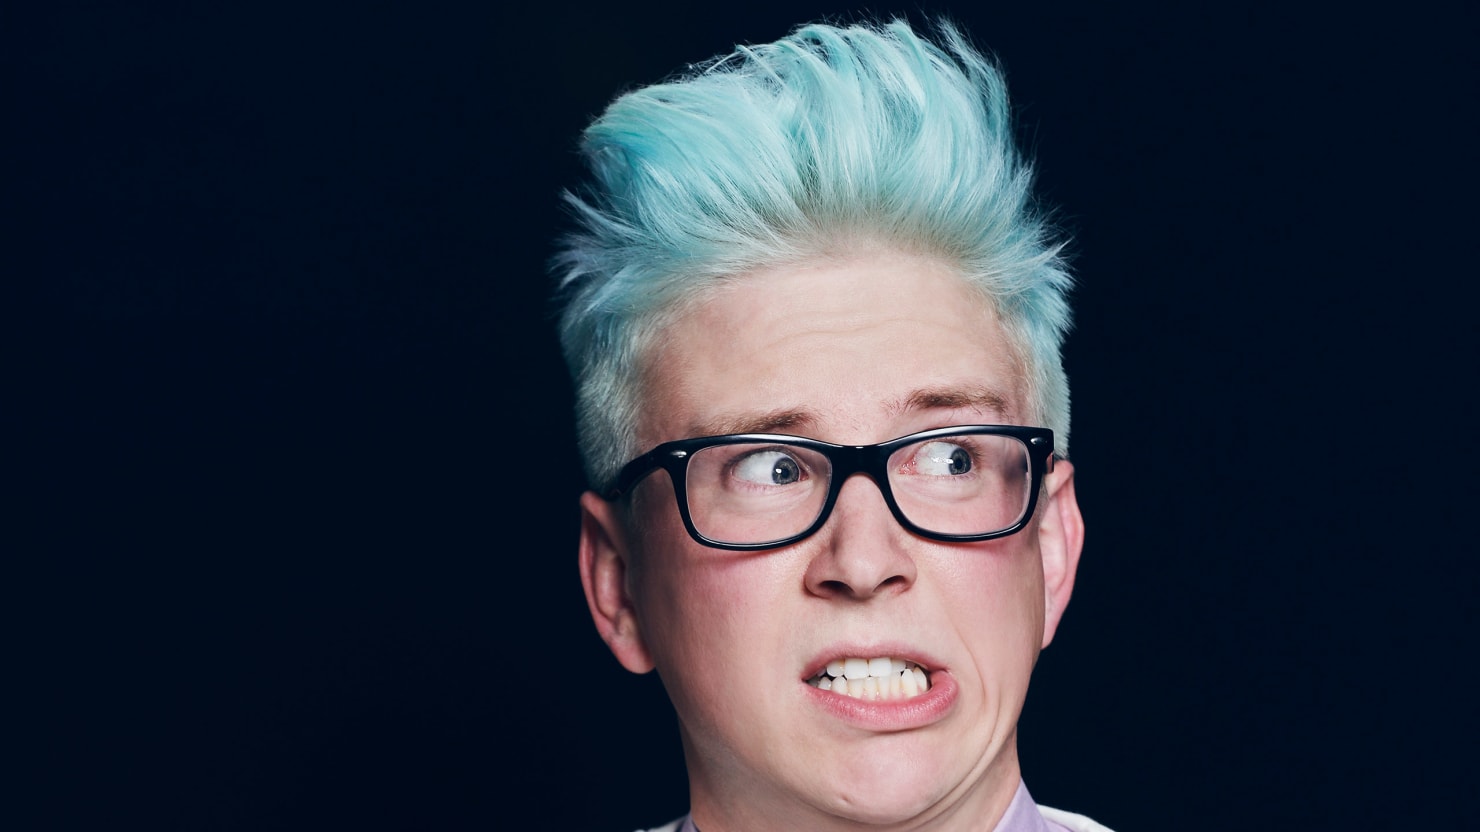 2. How to achieve Tyler Oakley's blue hair look - wide 2